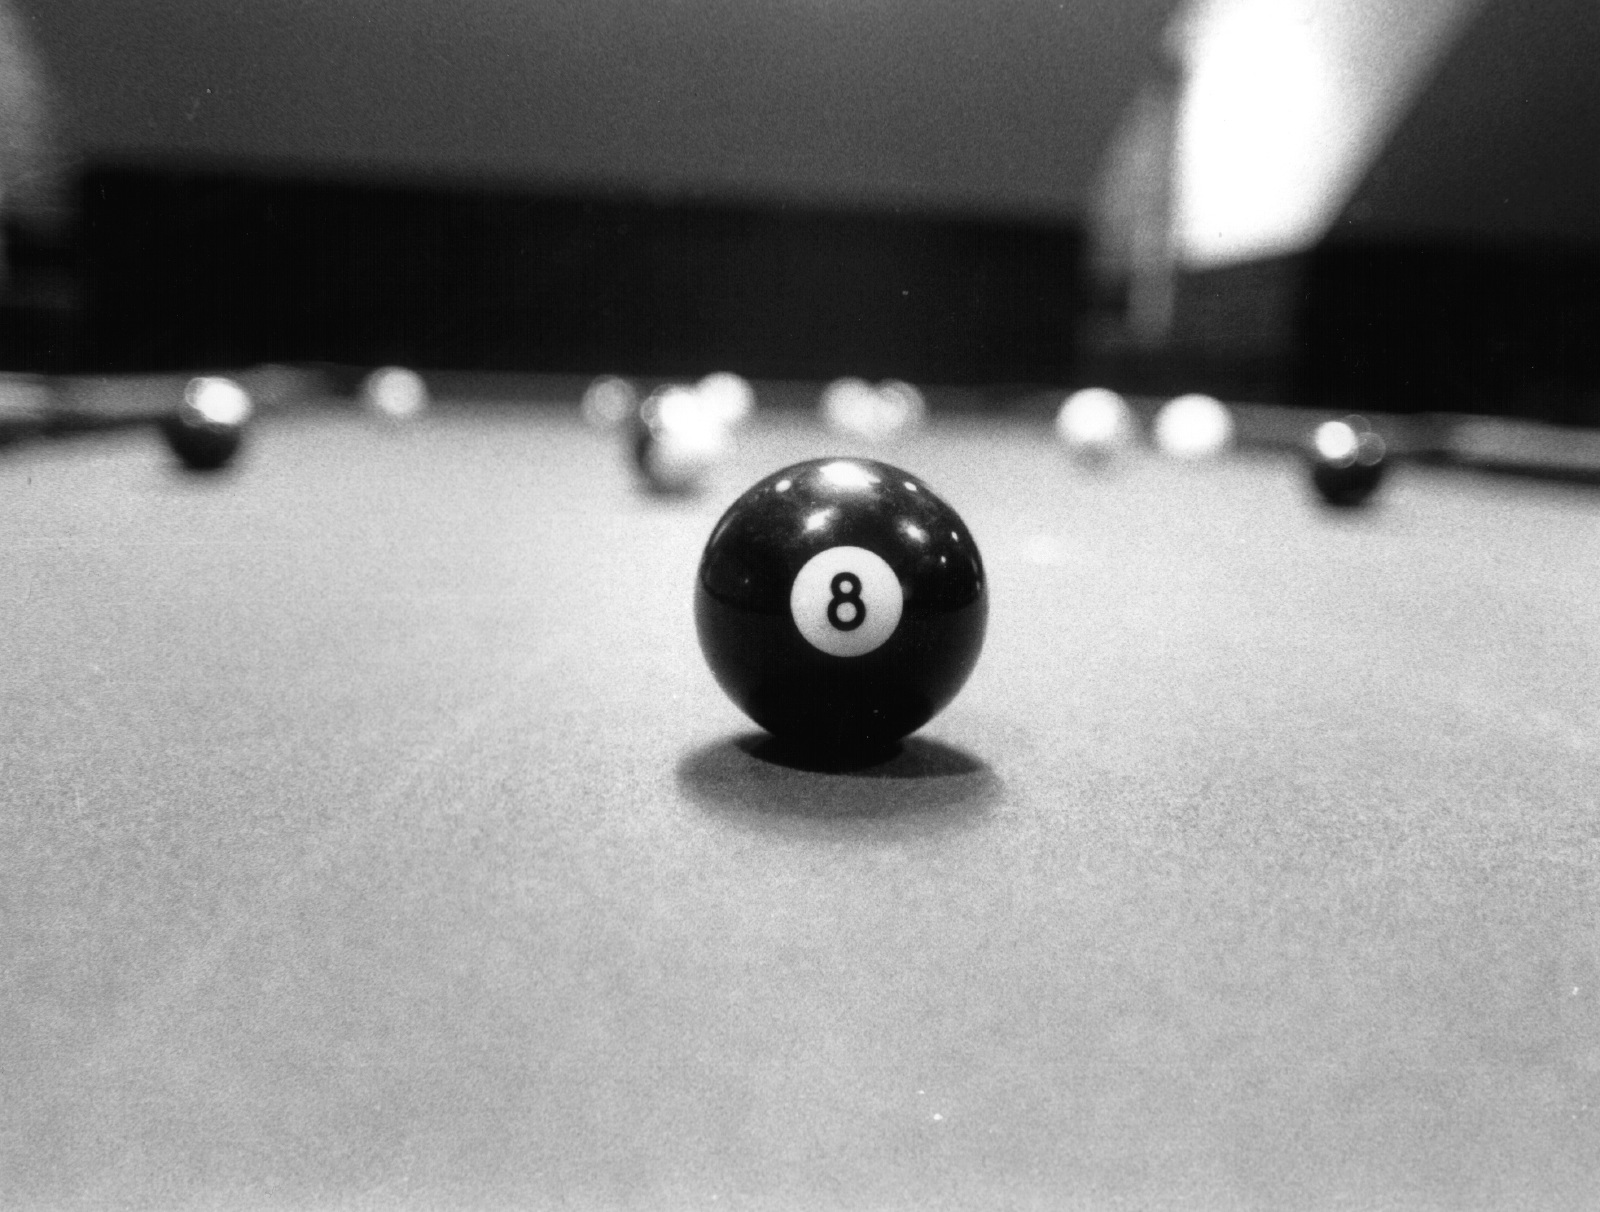 8 Ball Wallpaper for PC Full HD Pictures